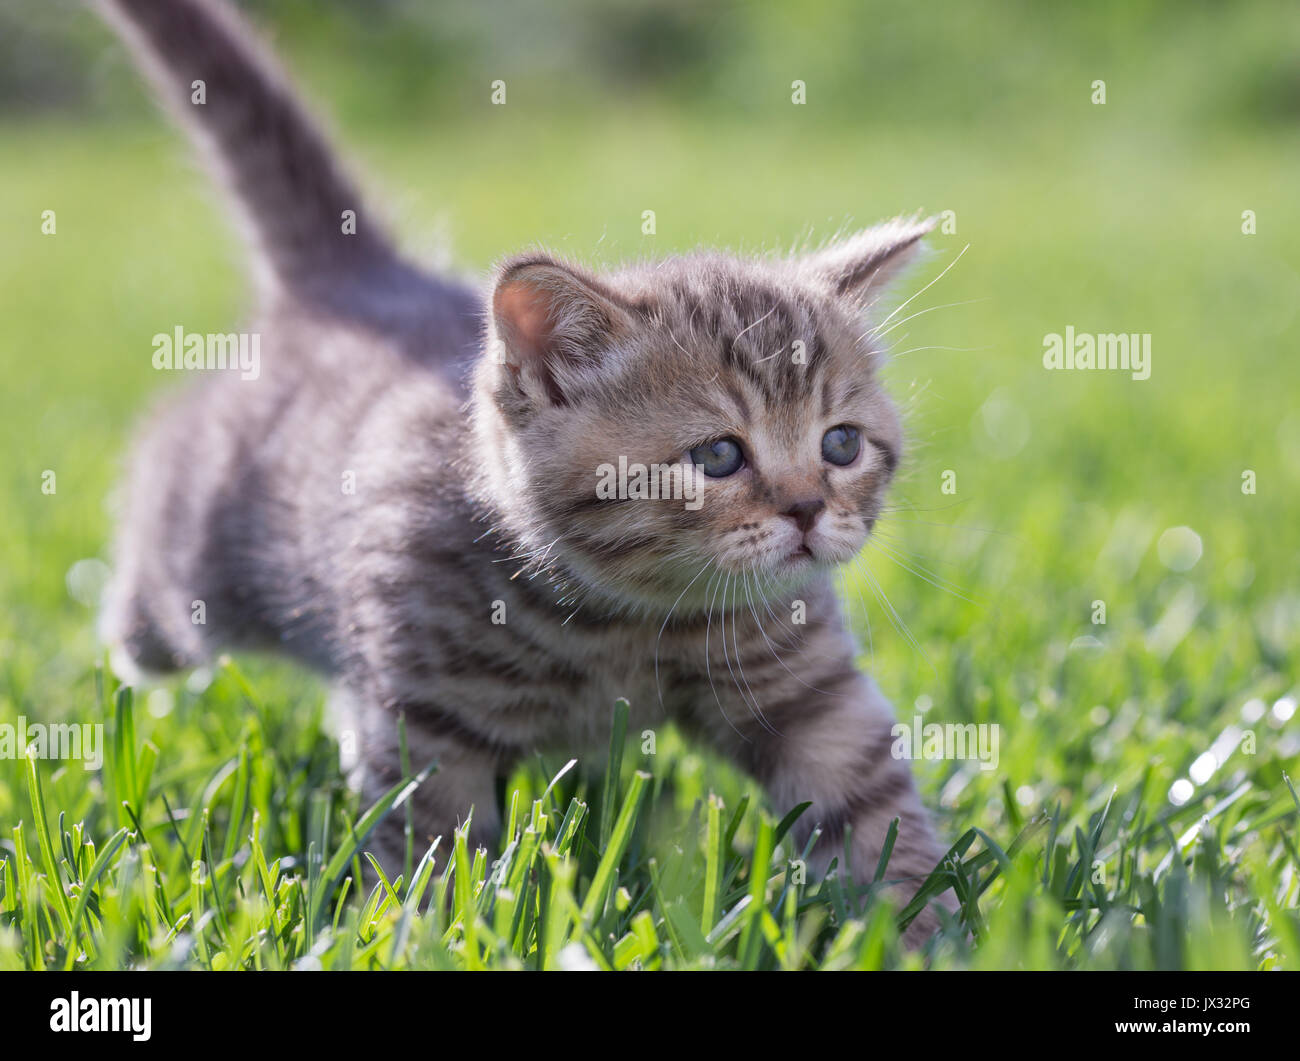 Young cat walking in green grass outdoor Stock Photo